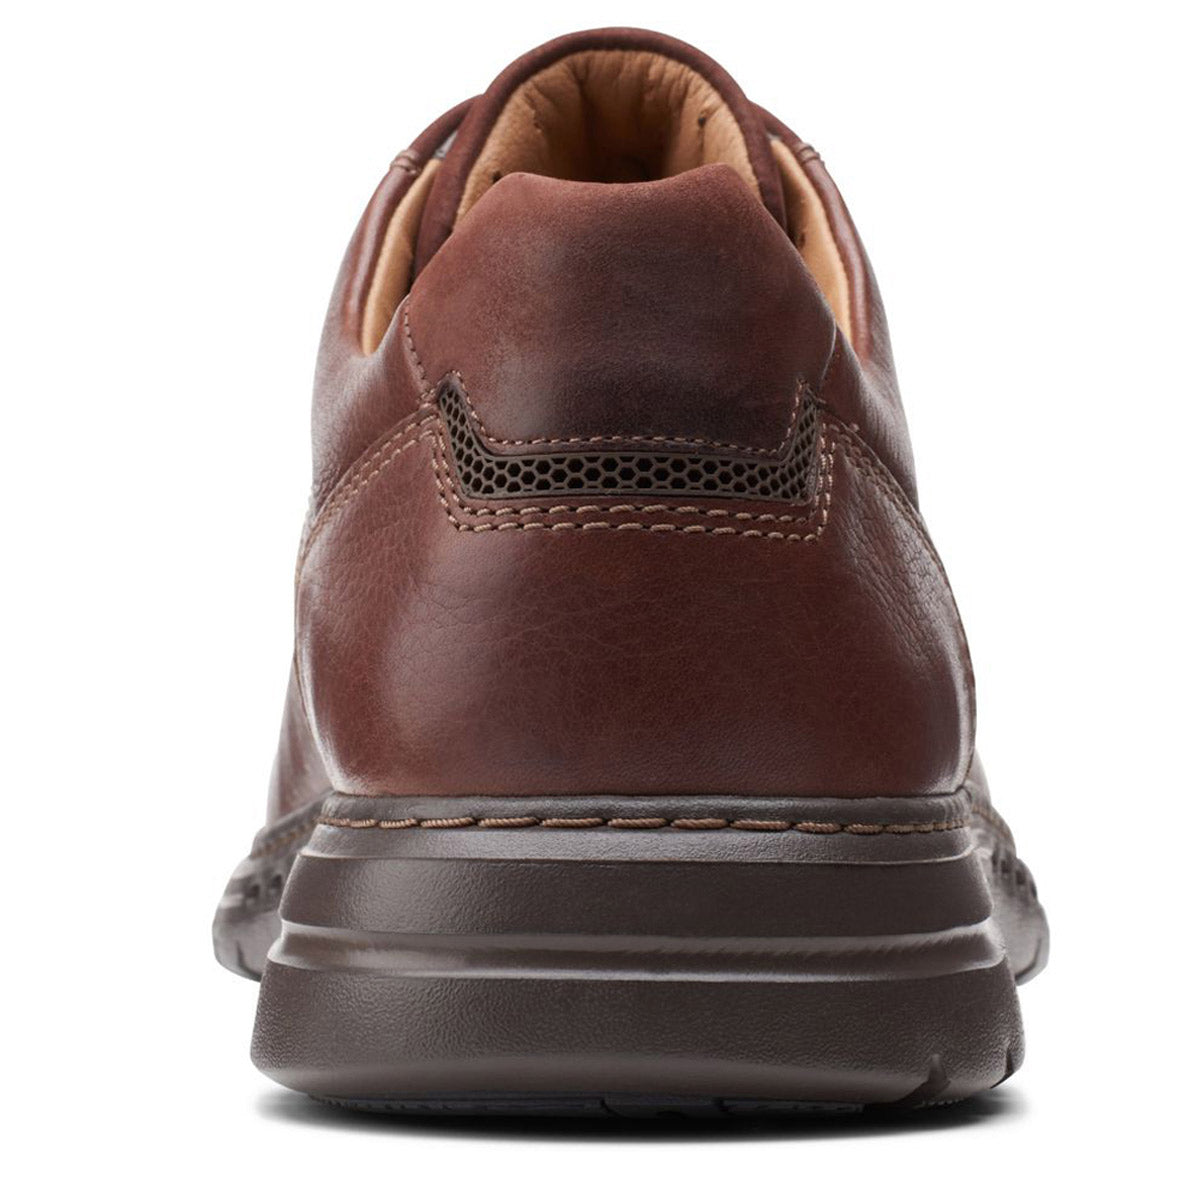 Close-up view of the back of a Clarks Un Brawley Pace Mahogany men&#39;s shoe with decorative stitching and rubber sole.